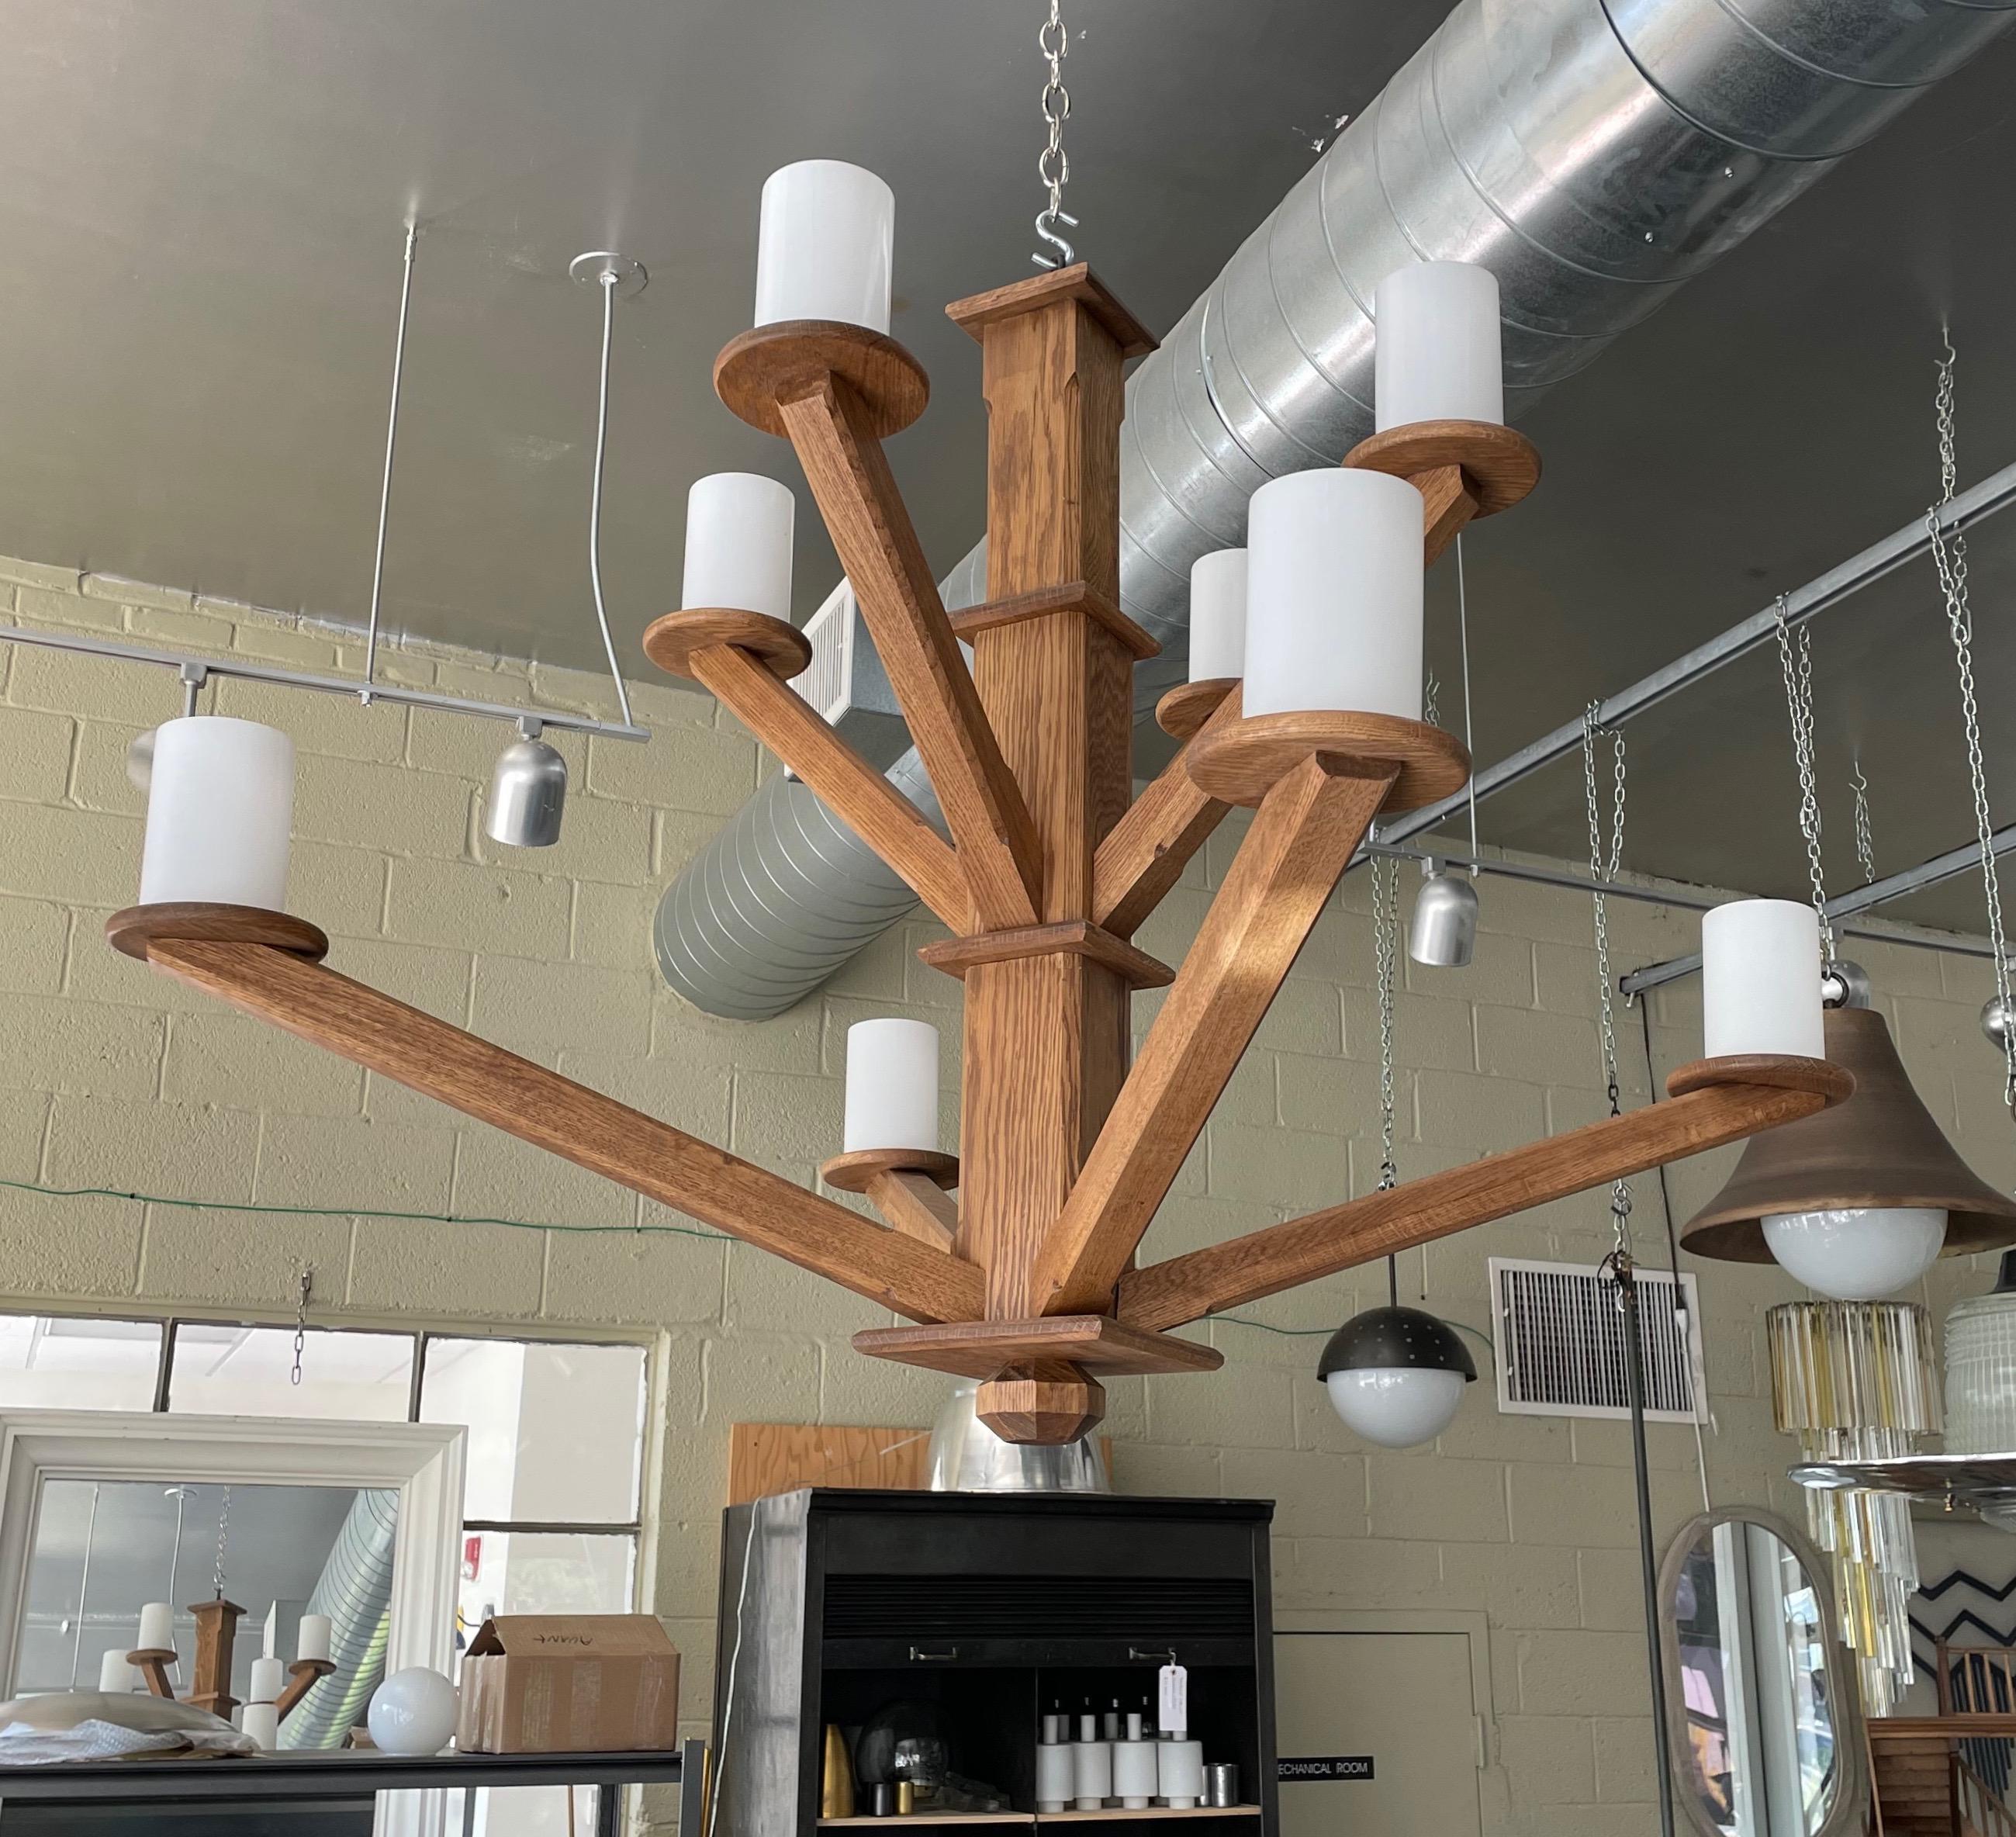 Hand crafted custom made large tiered solid oak wood chandelier. Chandelier is 40